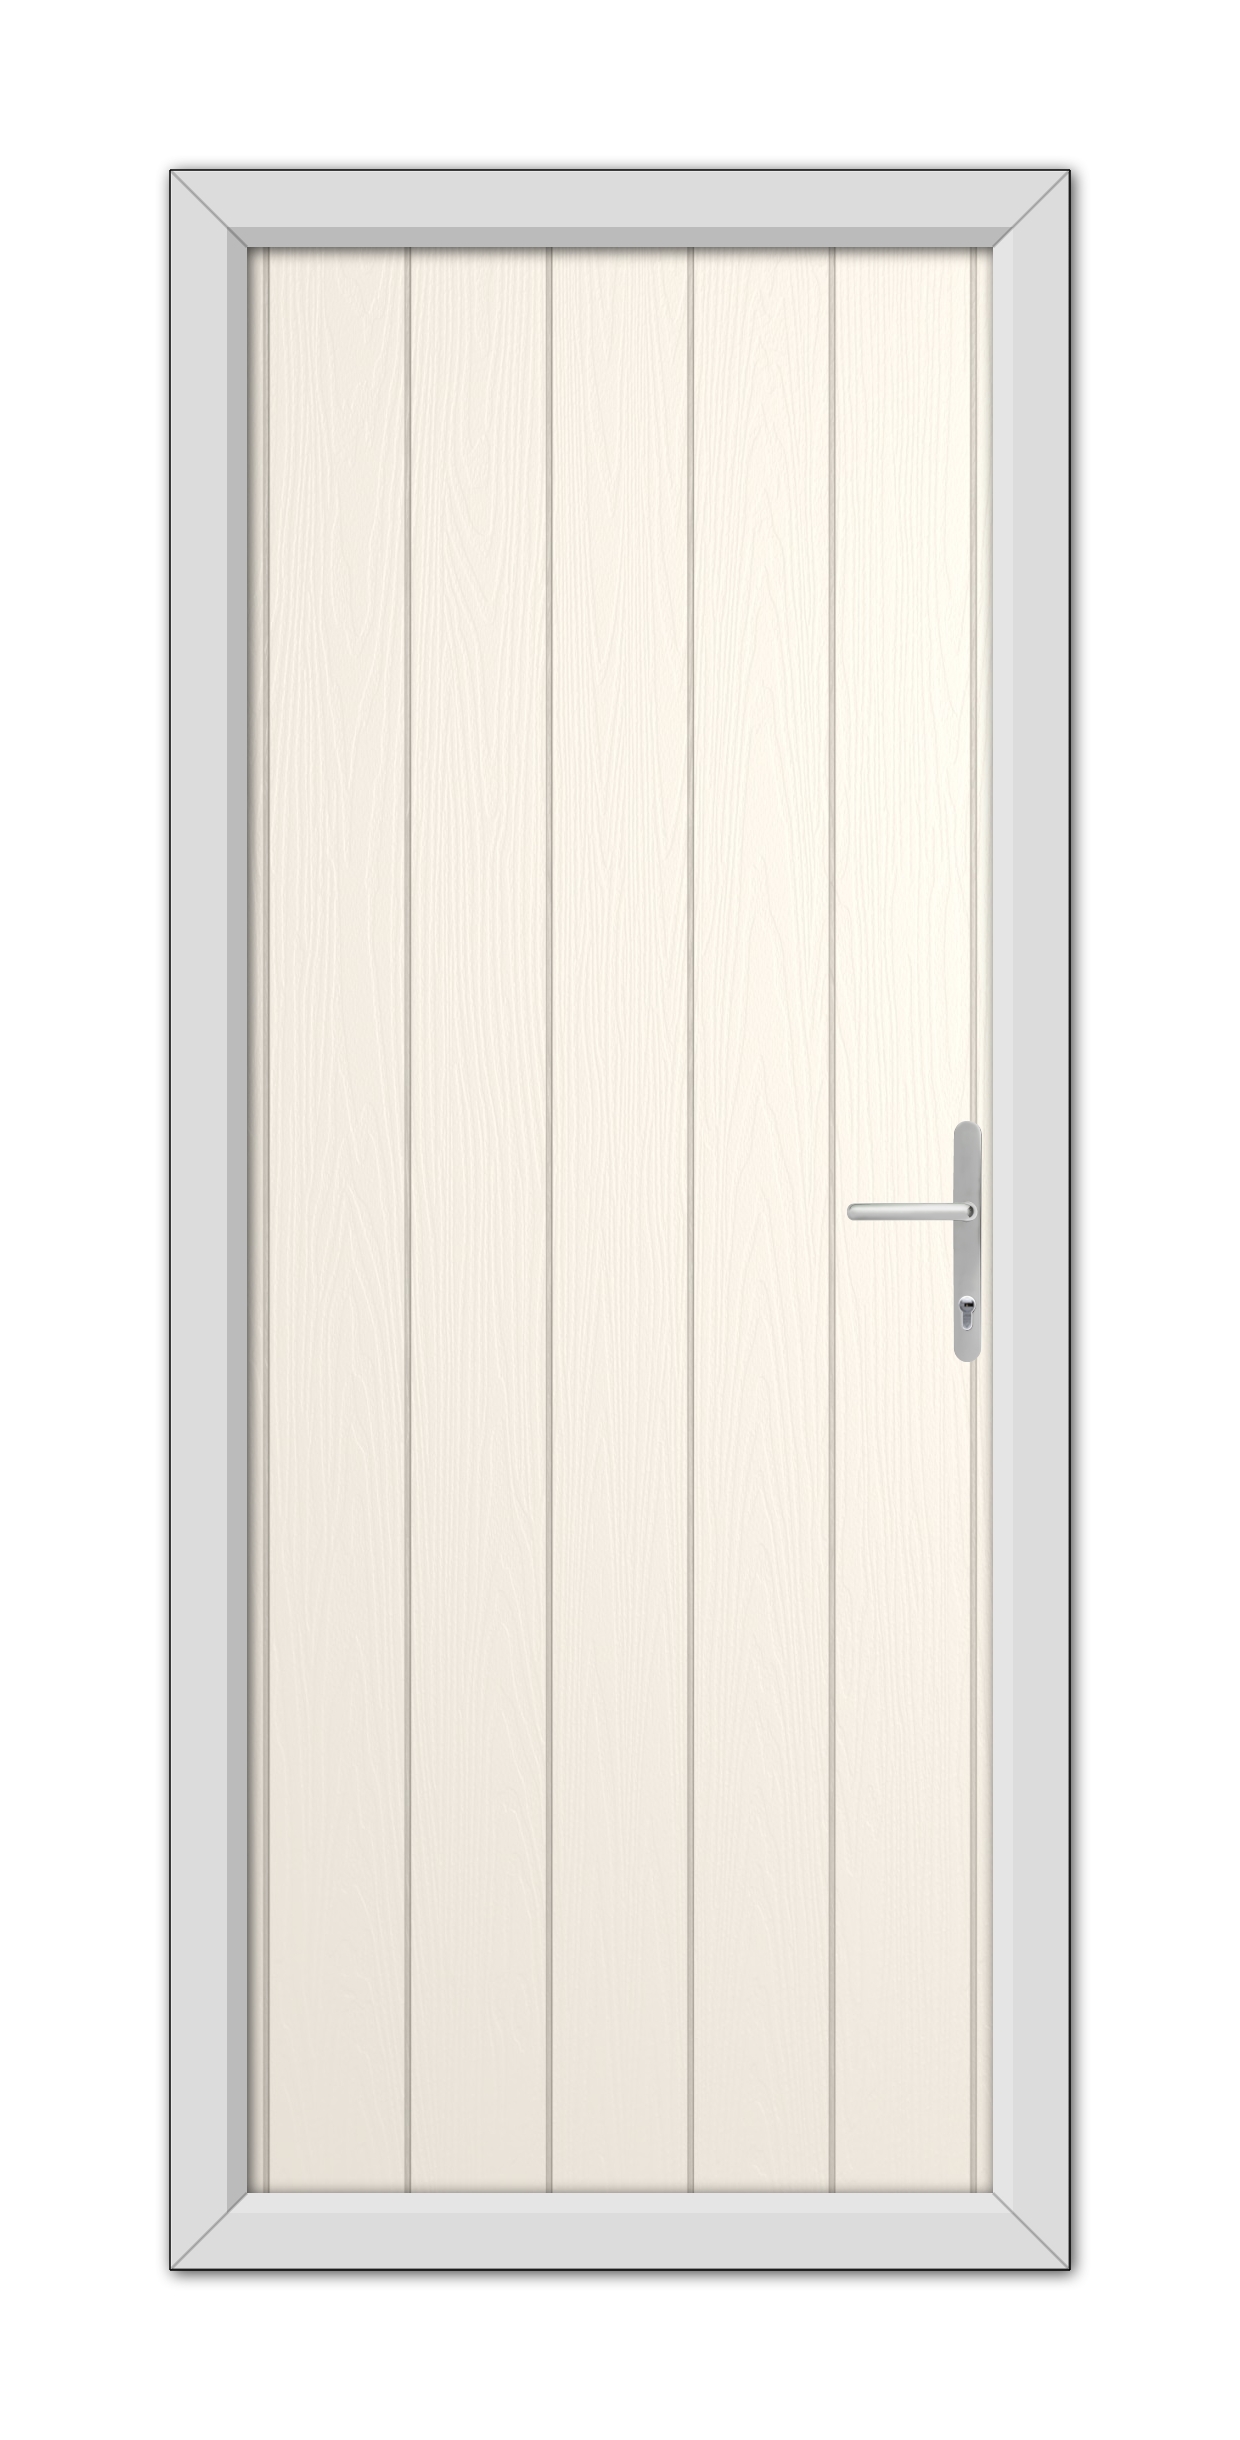 A modern White Foil Gloucester Composite Door 48mm Timber Core with a metal handle, set in a simple gray frame, viewed head-on.